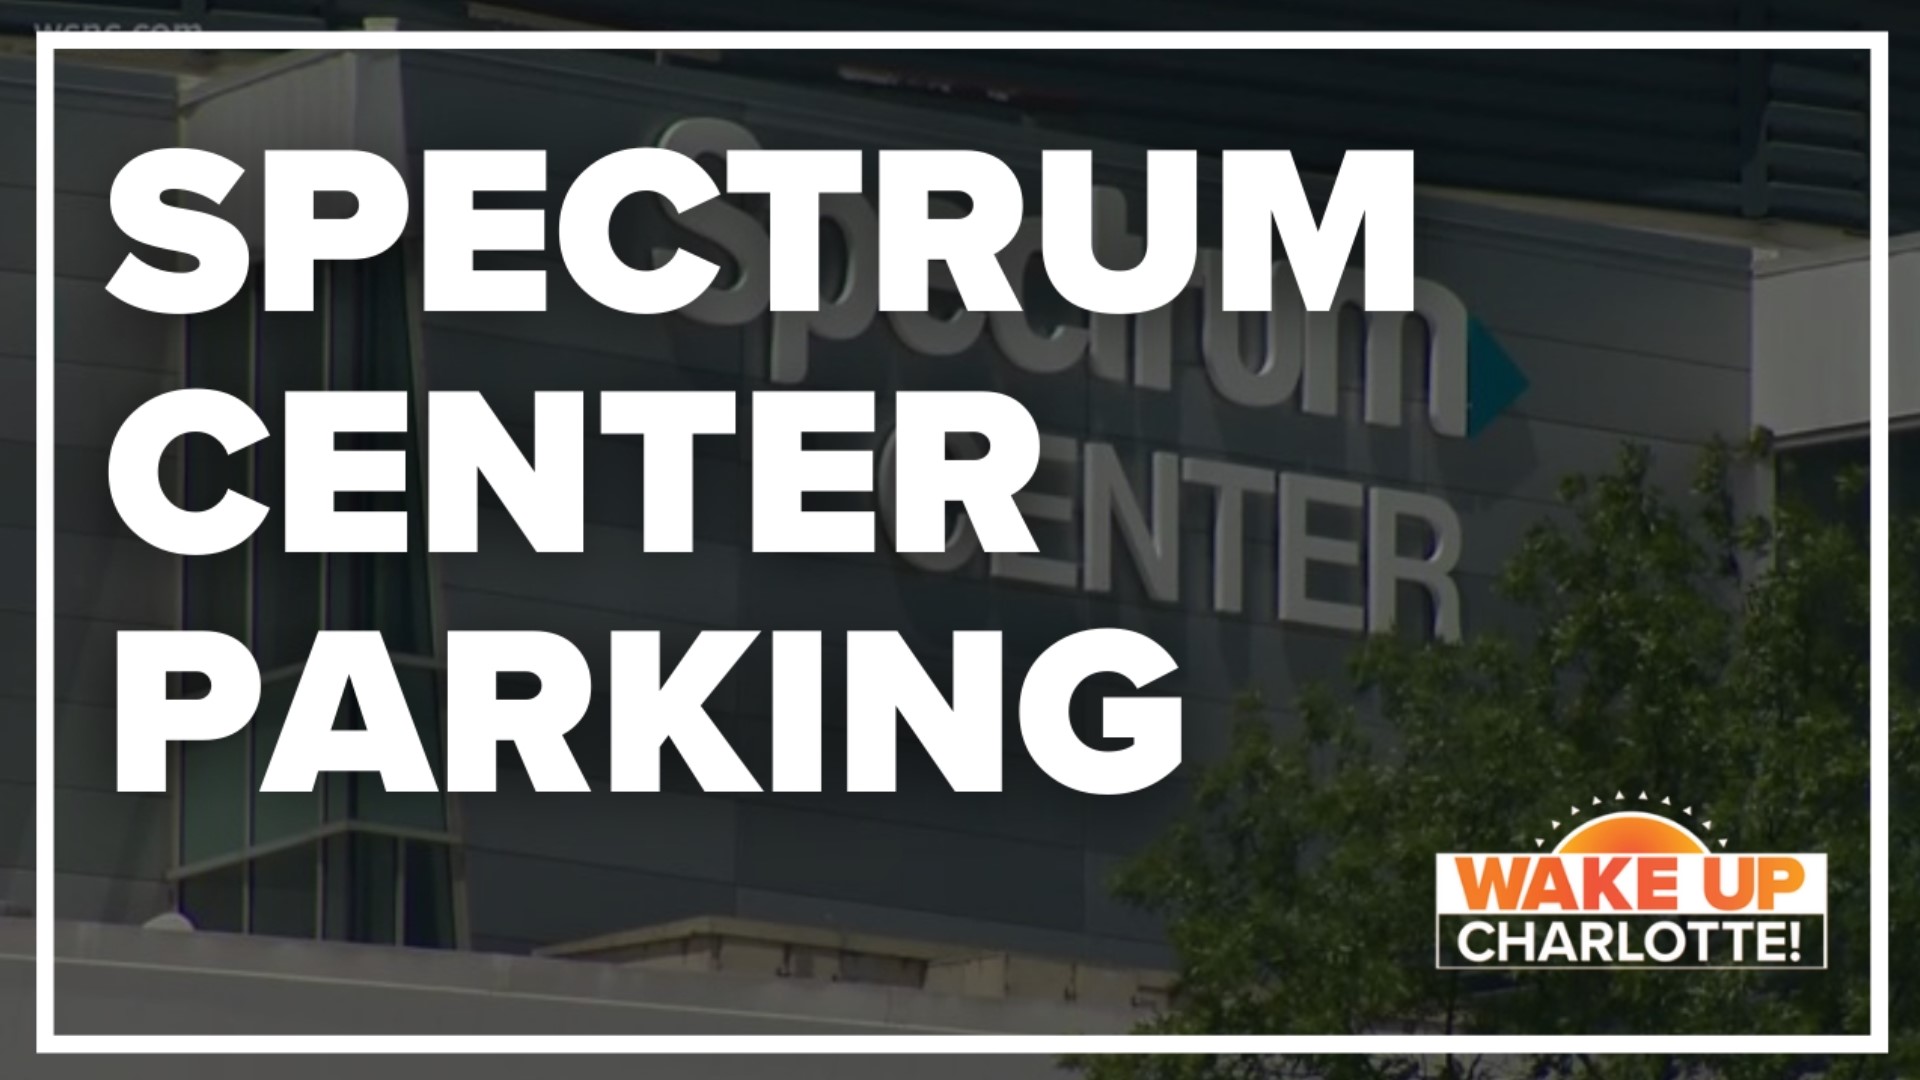 If you’re driving into uptown for an event at the spectrum center, you’re most likely paying for parking. How does the price of parking compare to other cities?